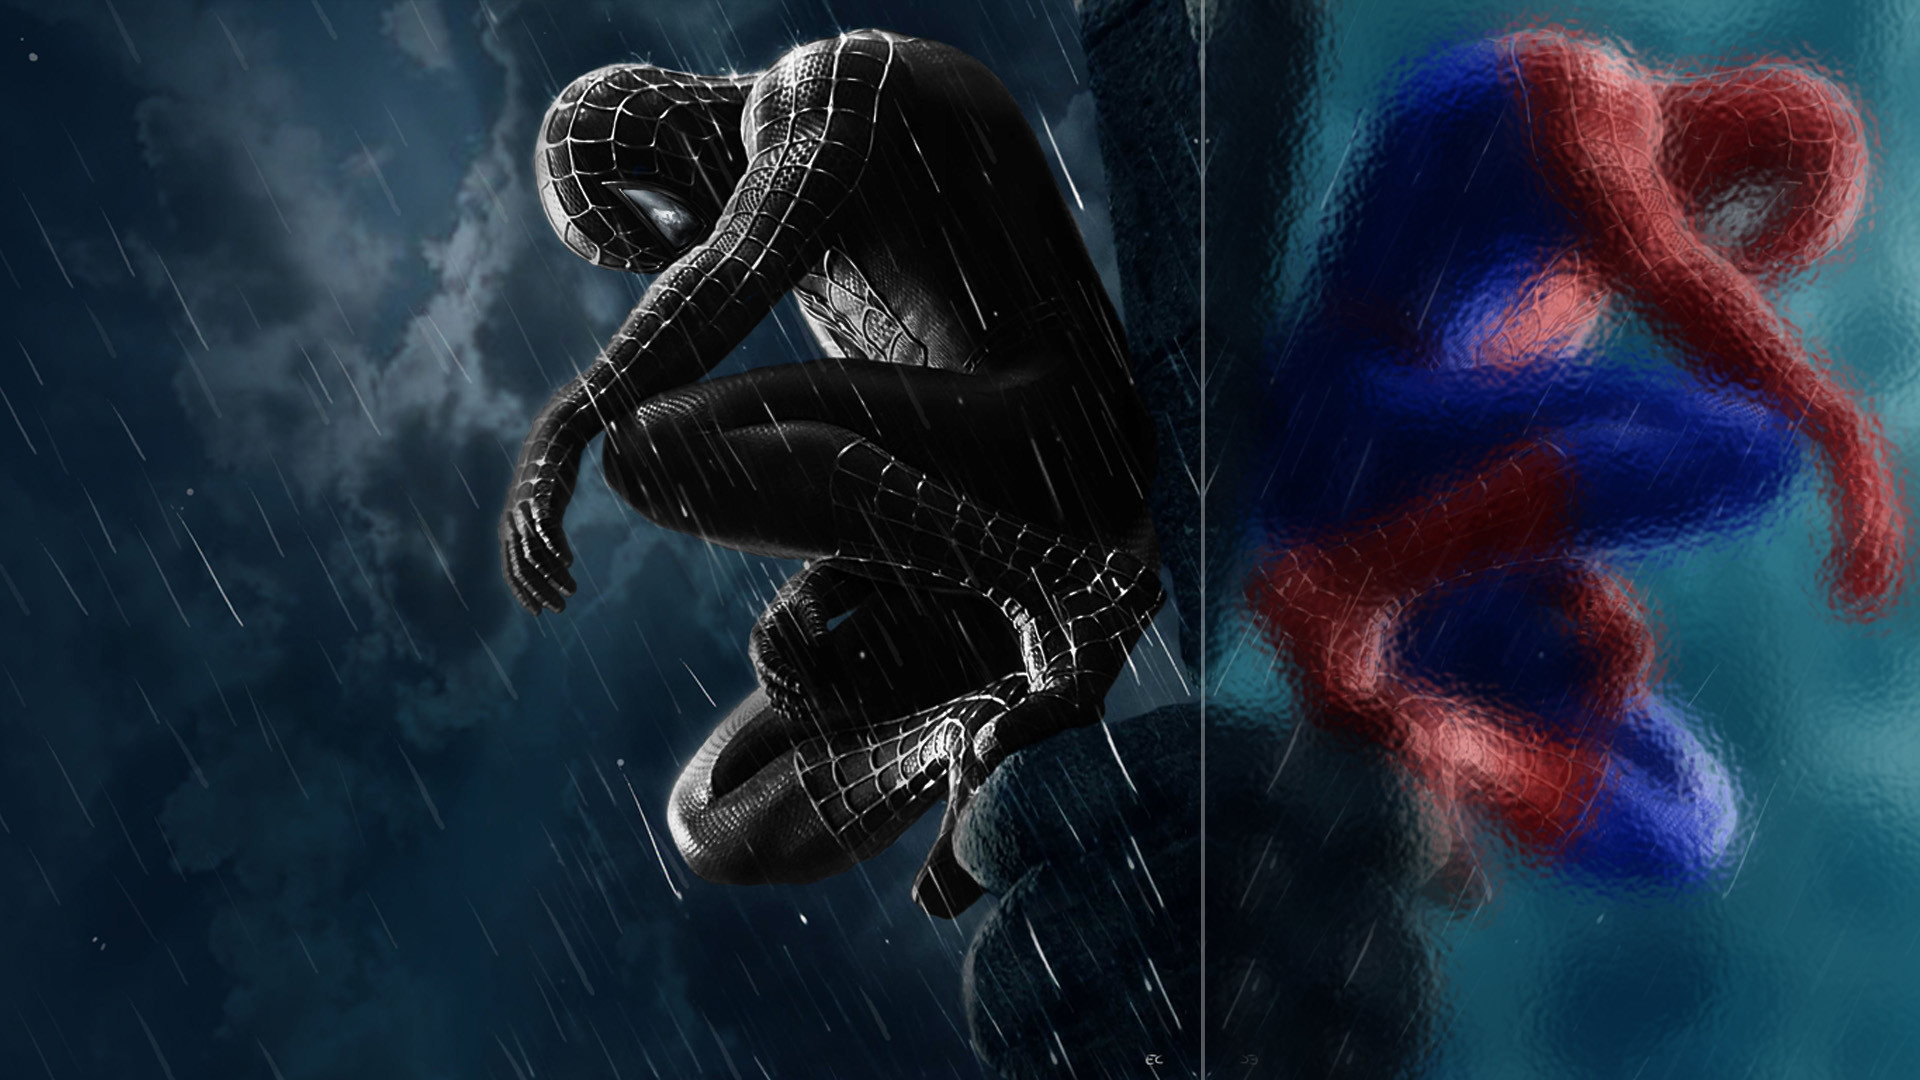 1920x1080 ... Spiderman 3 Wallpaper: Reflections () by Omegacronalpha